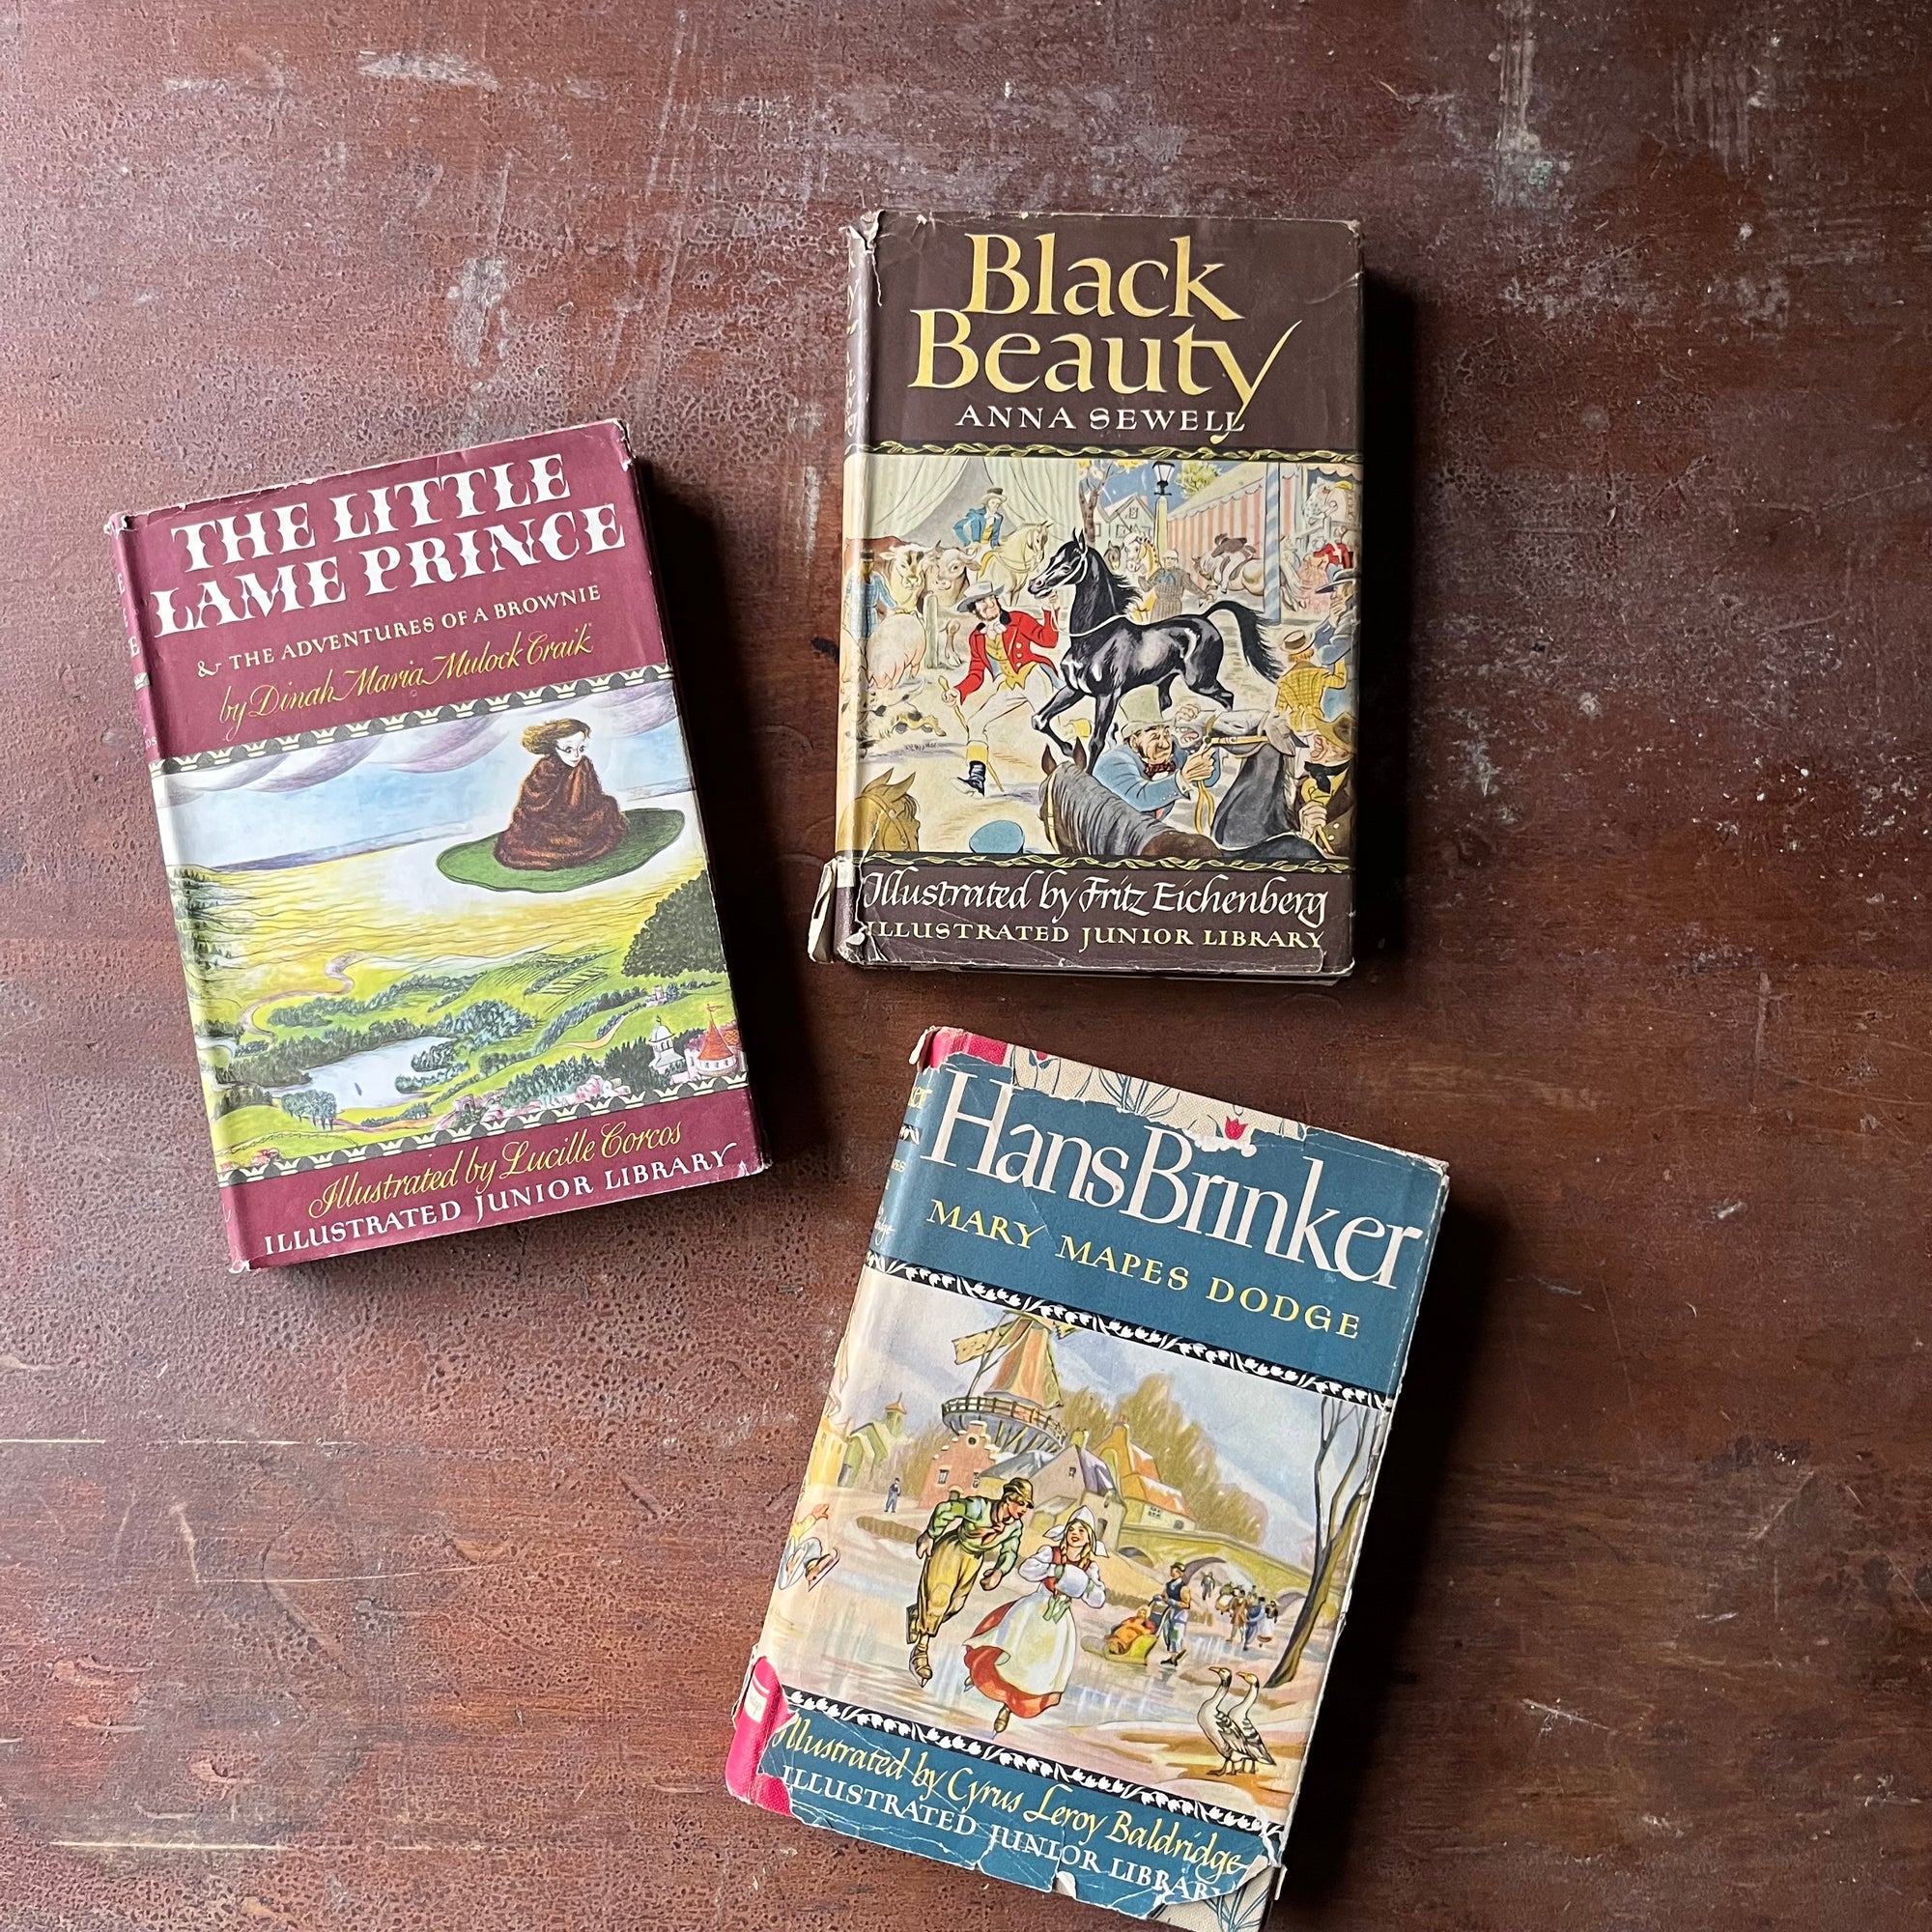 vintage children's classic literature - Illustrated Junior Library Series Book Set-Black Beauty written by Anna Sewell, The Little Lame Prince written by Dinah Maria Mulock Craik, & Hans Brinker written by Mary Mapes Dodge - view of the dust jacket's colorful front covers